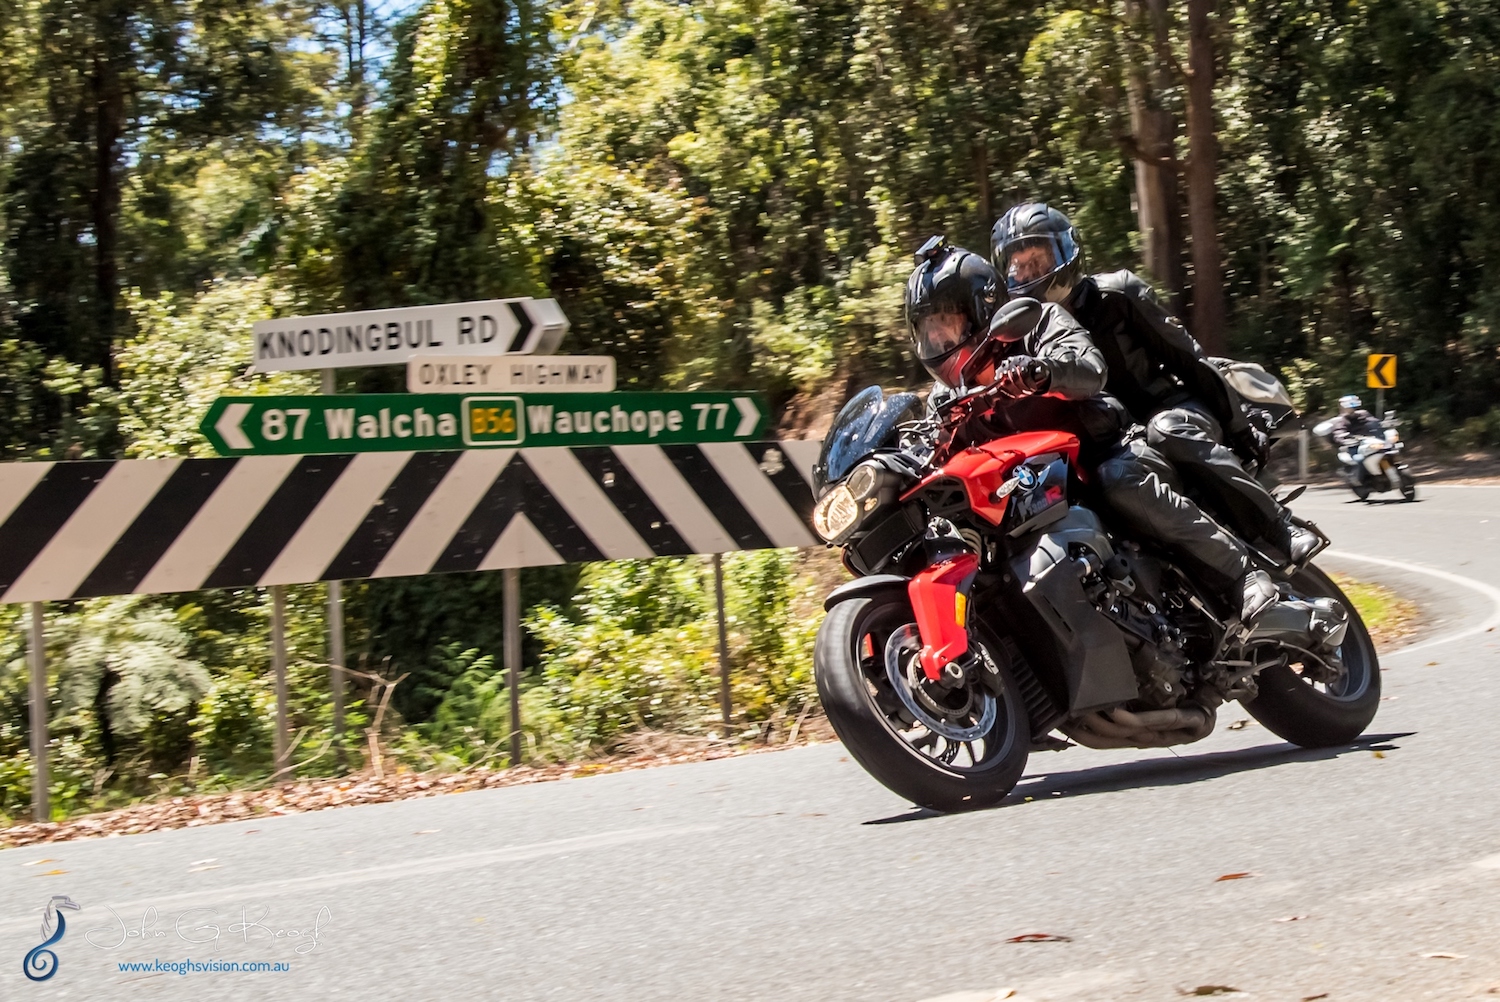 Save the Oxley organiser Ken Healey on his BMW K 1300 R - Motorcycle Friendly Town (Photo: Keoghs Vision Photography)